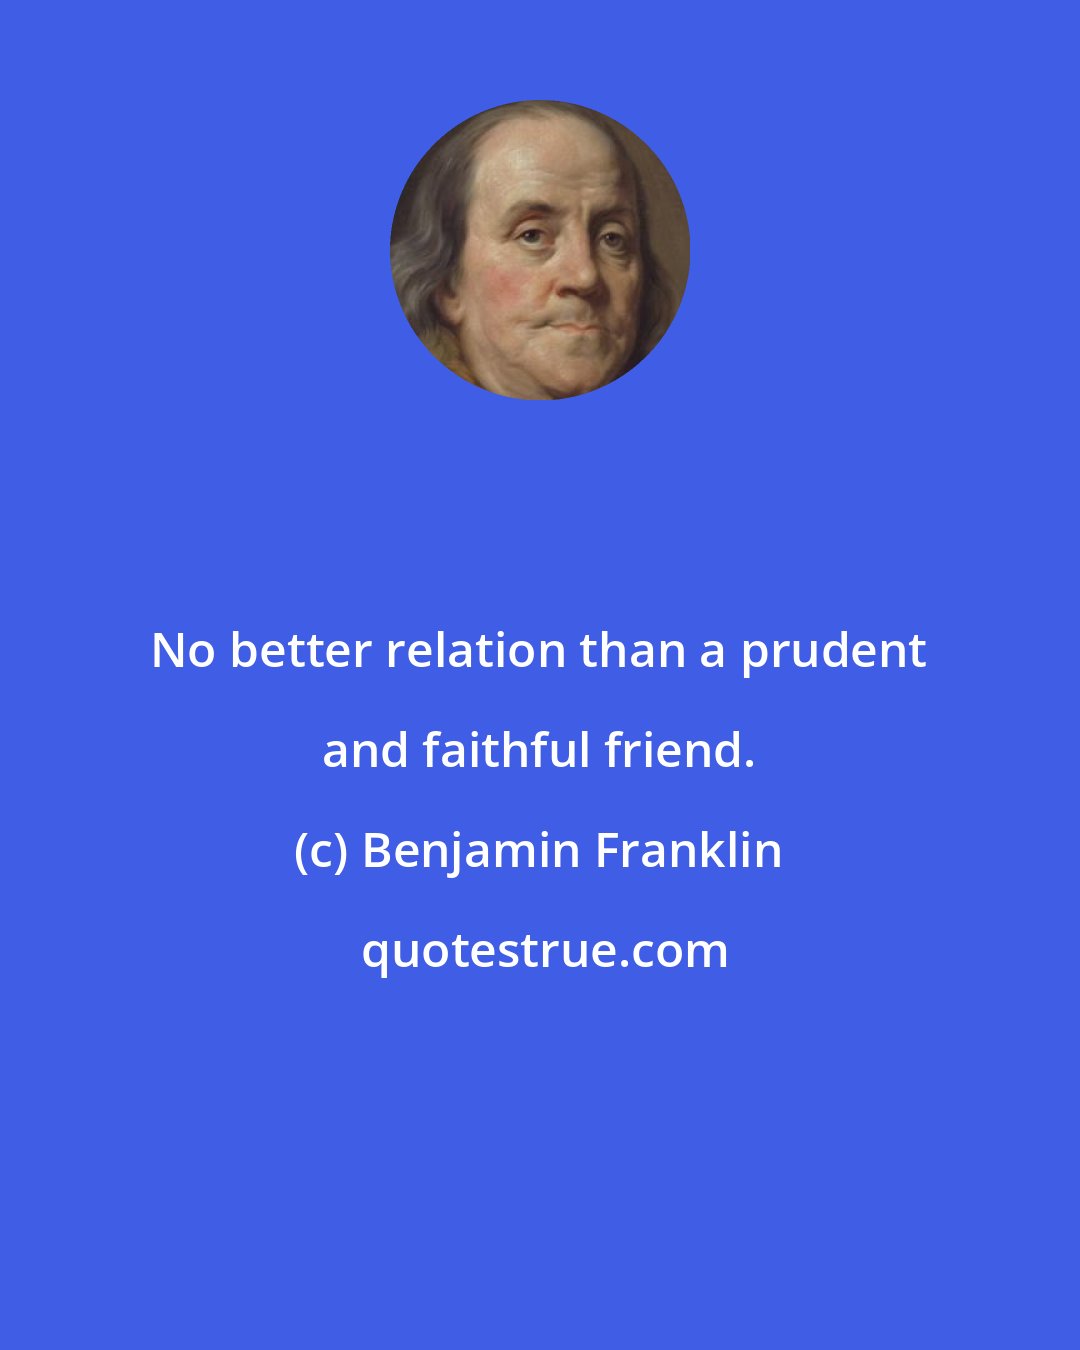 Benjamin Franklin: No better relation than a prudent and faithful friend.